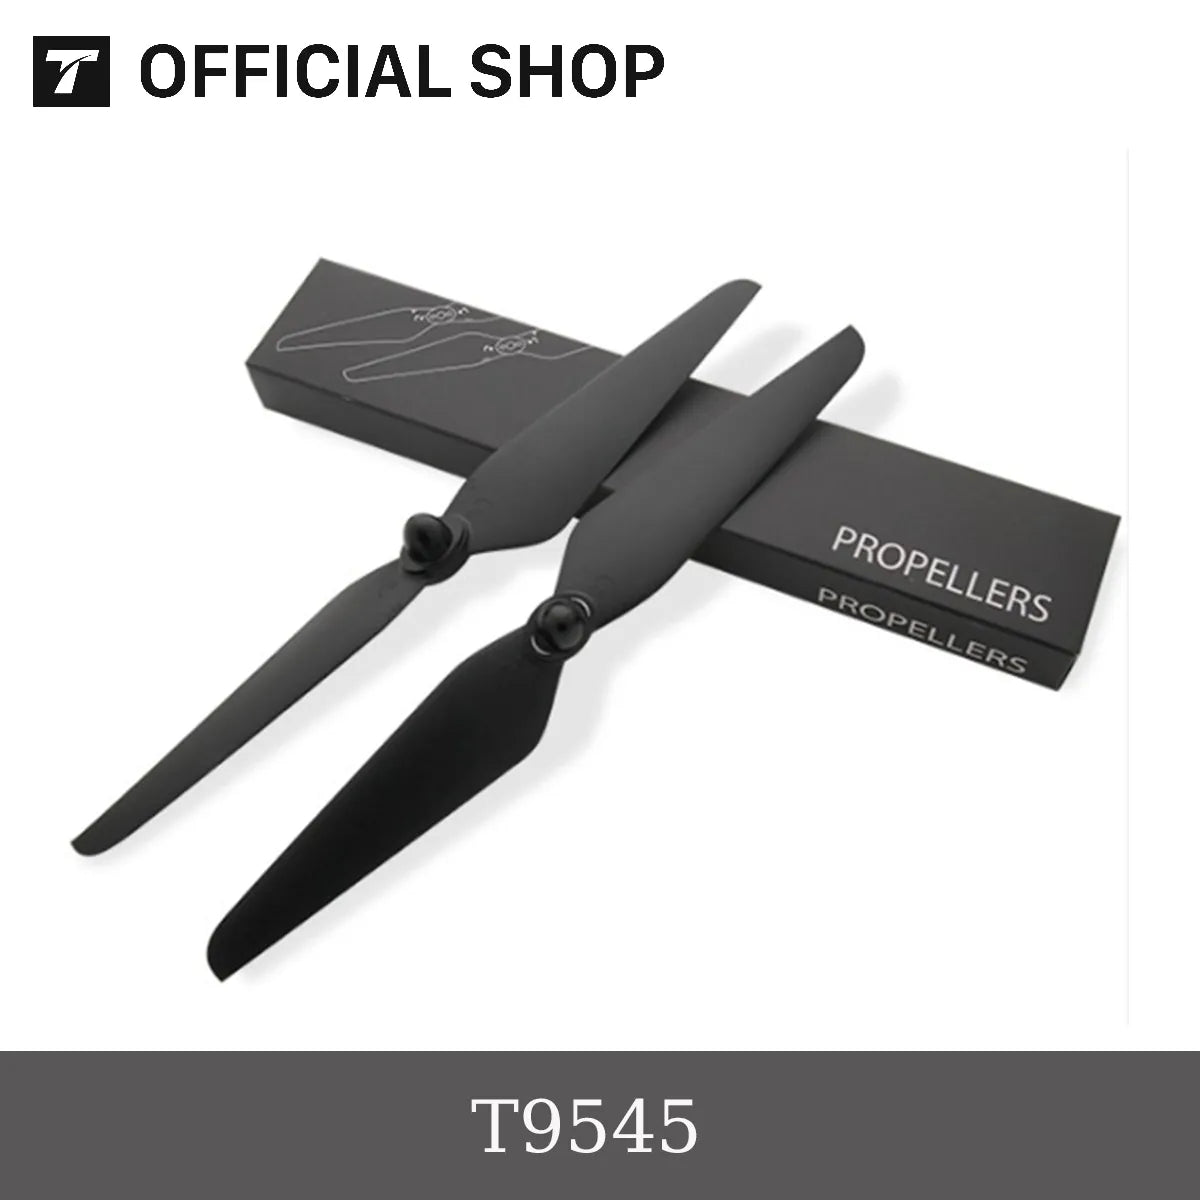 OFFICIAL SHOP T9545 PROPELLERS PRSPELL